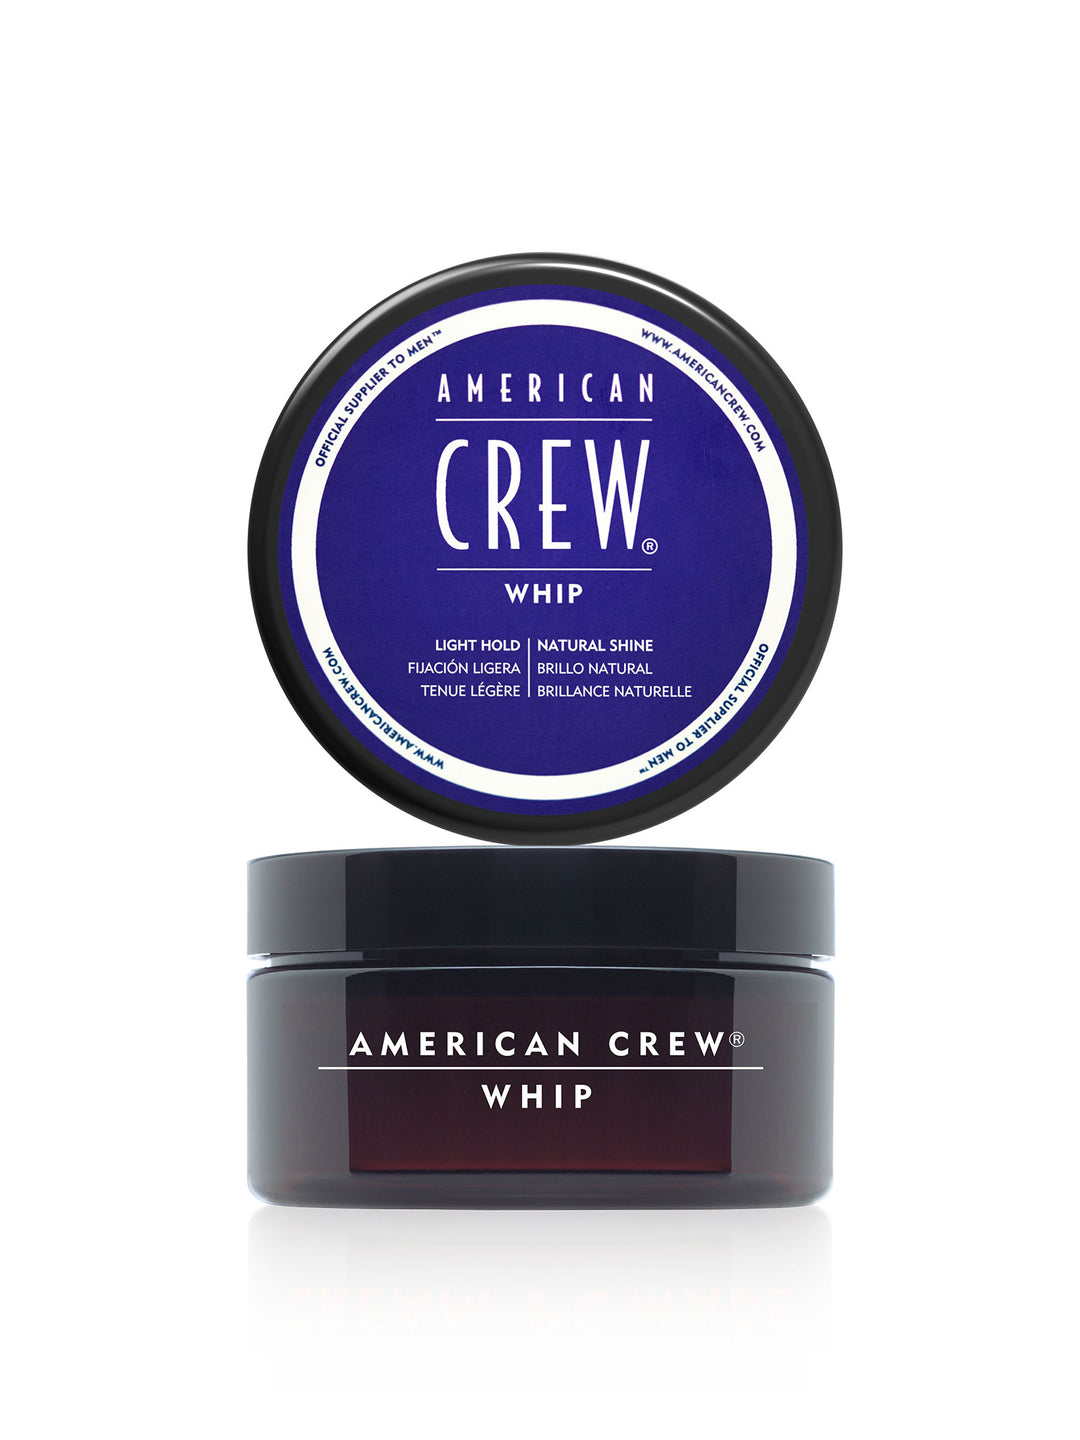 Crew Hair - Hair American and Cream, Products Gel, Styling Pomade,